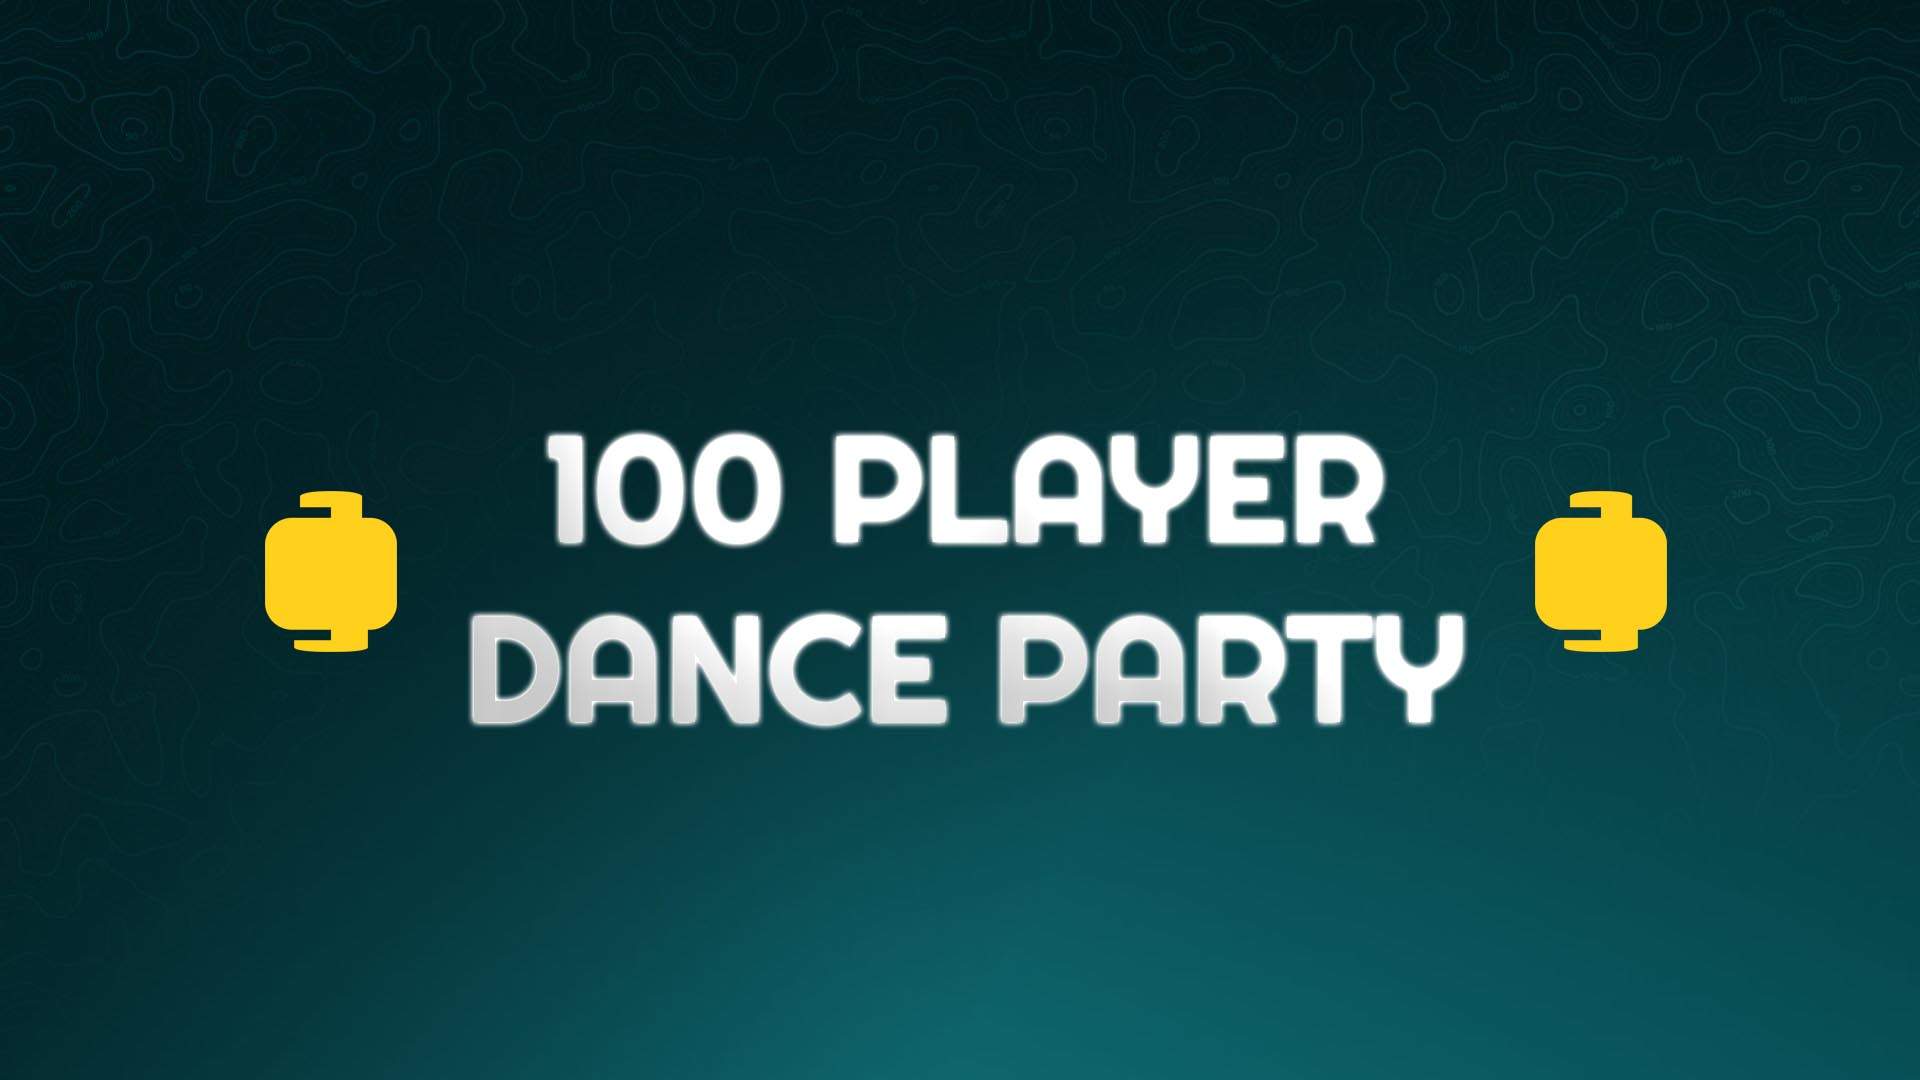 100 PLAYER DANCE PARTY🧱